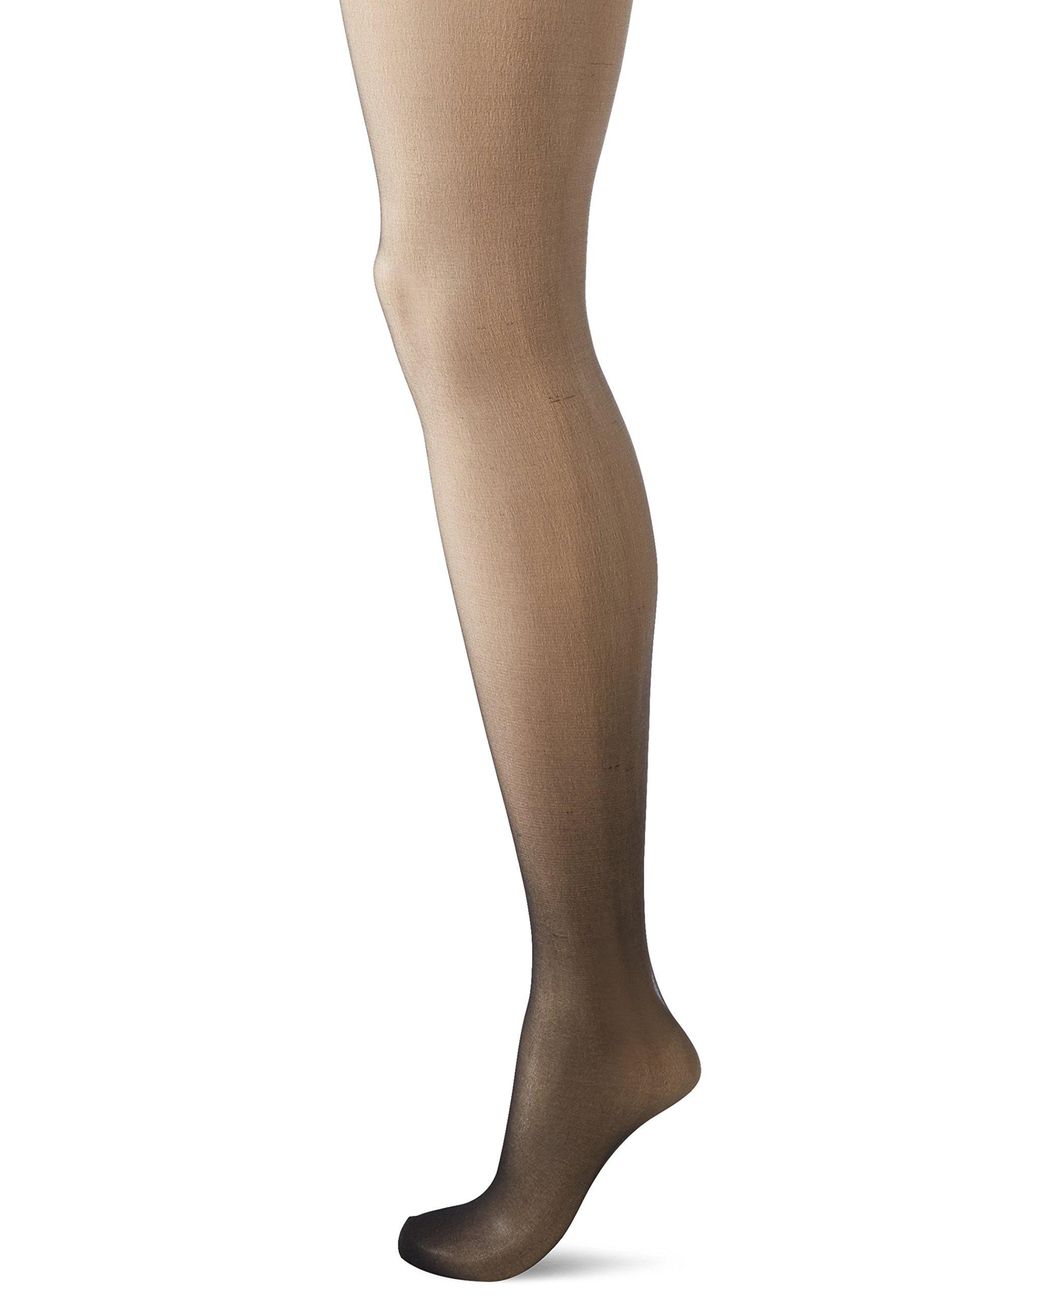 Hanes Silk Reflections Perfect Nudes Control Top Pantyhose Save 33